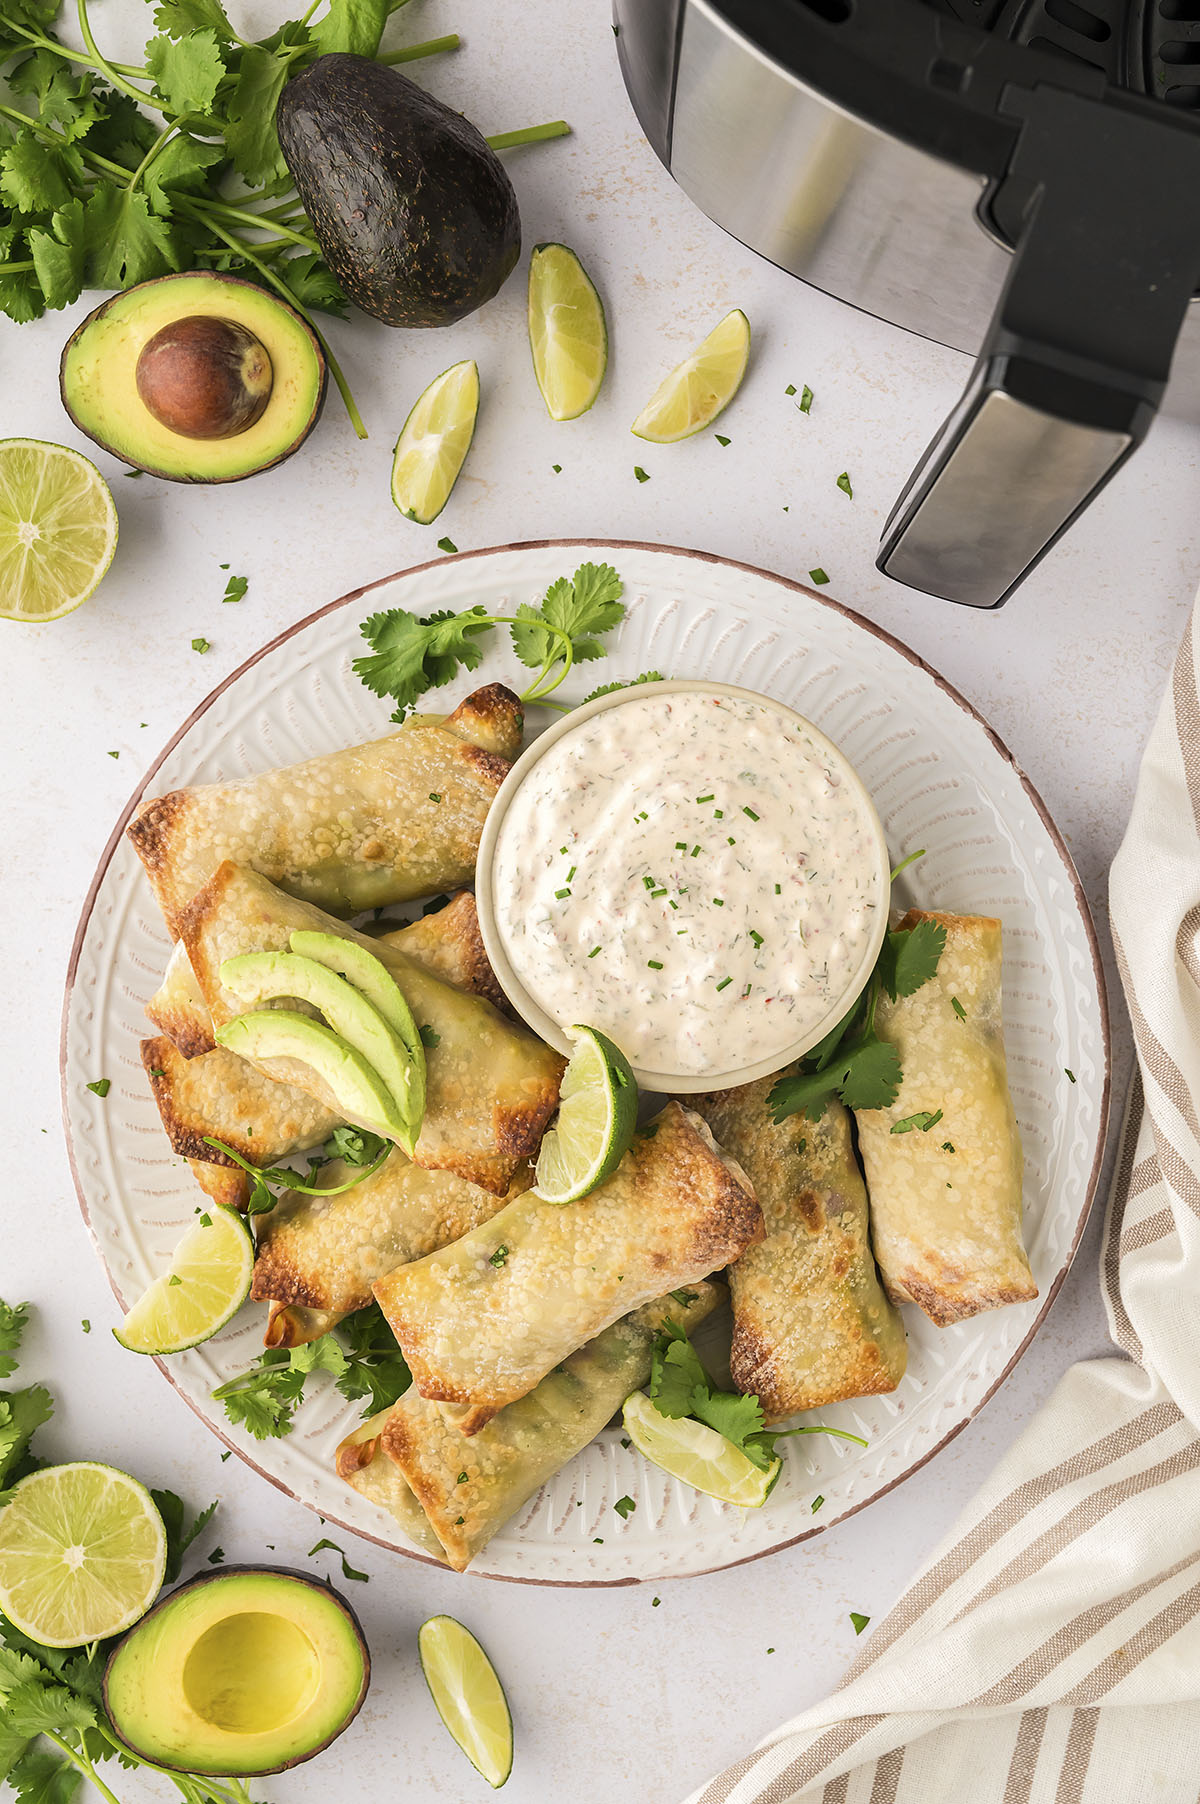 A white plate full of avocado egg rolls and homemade ranch dip.